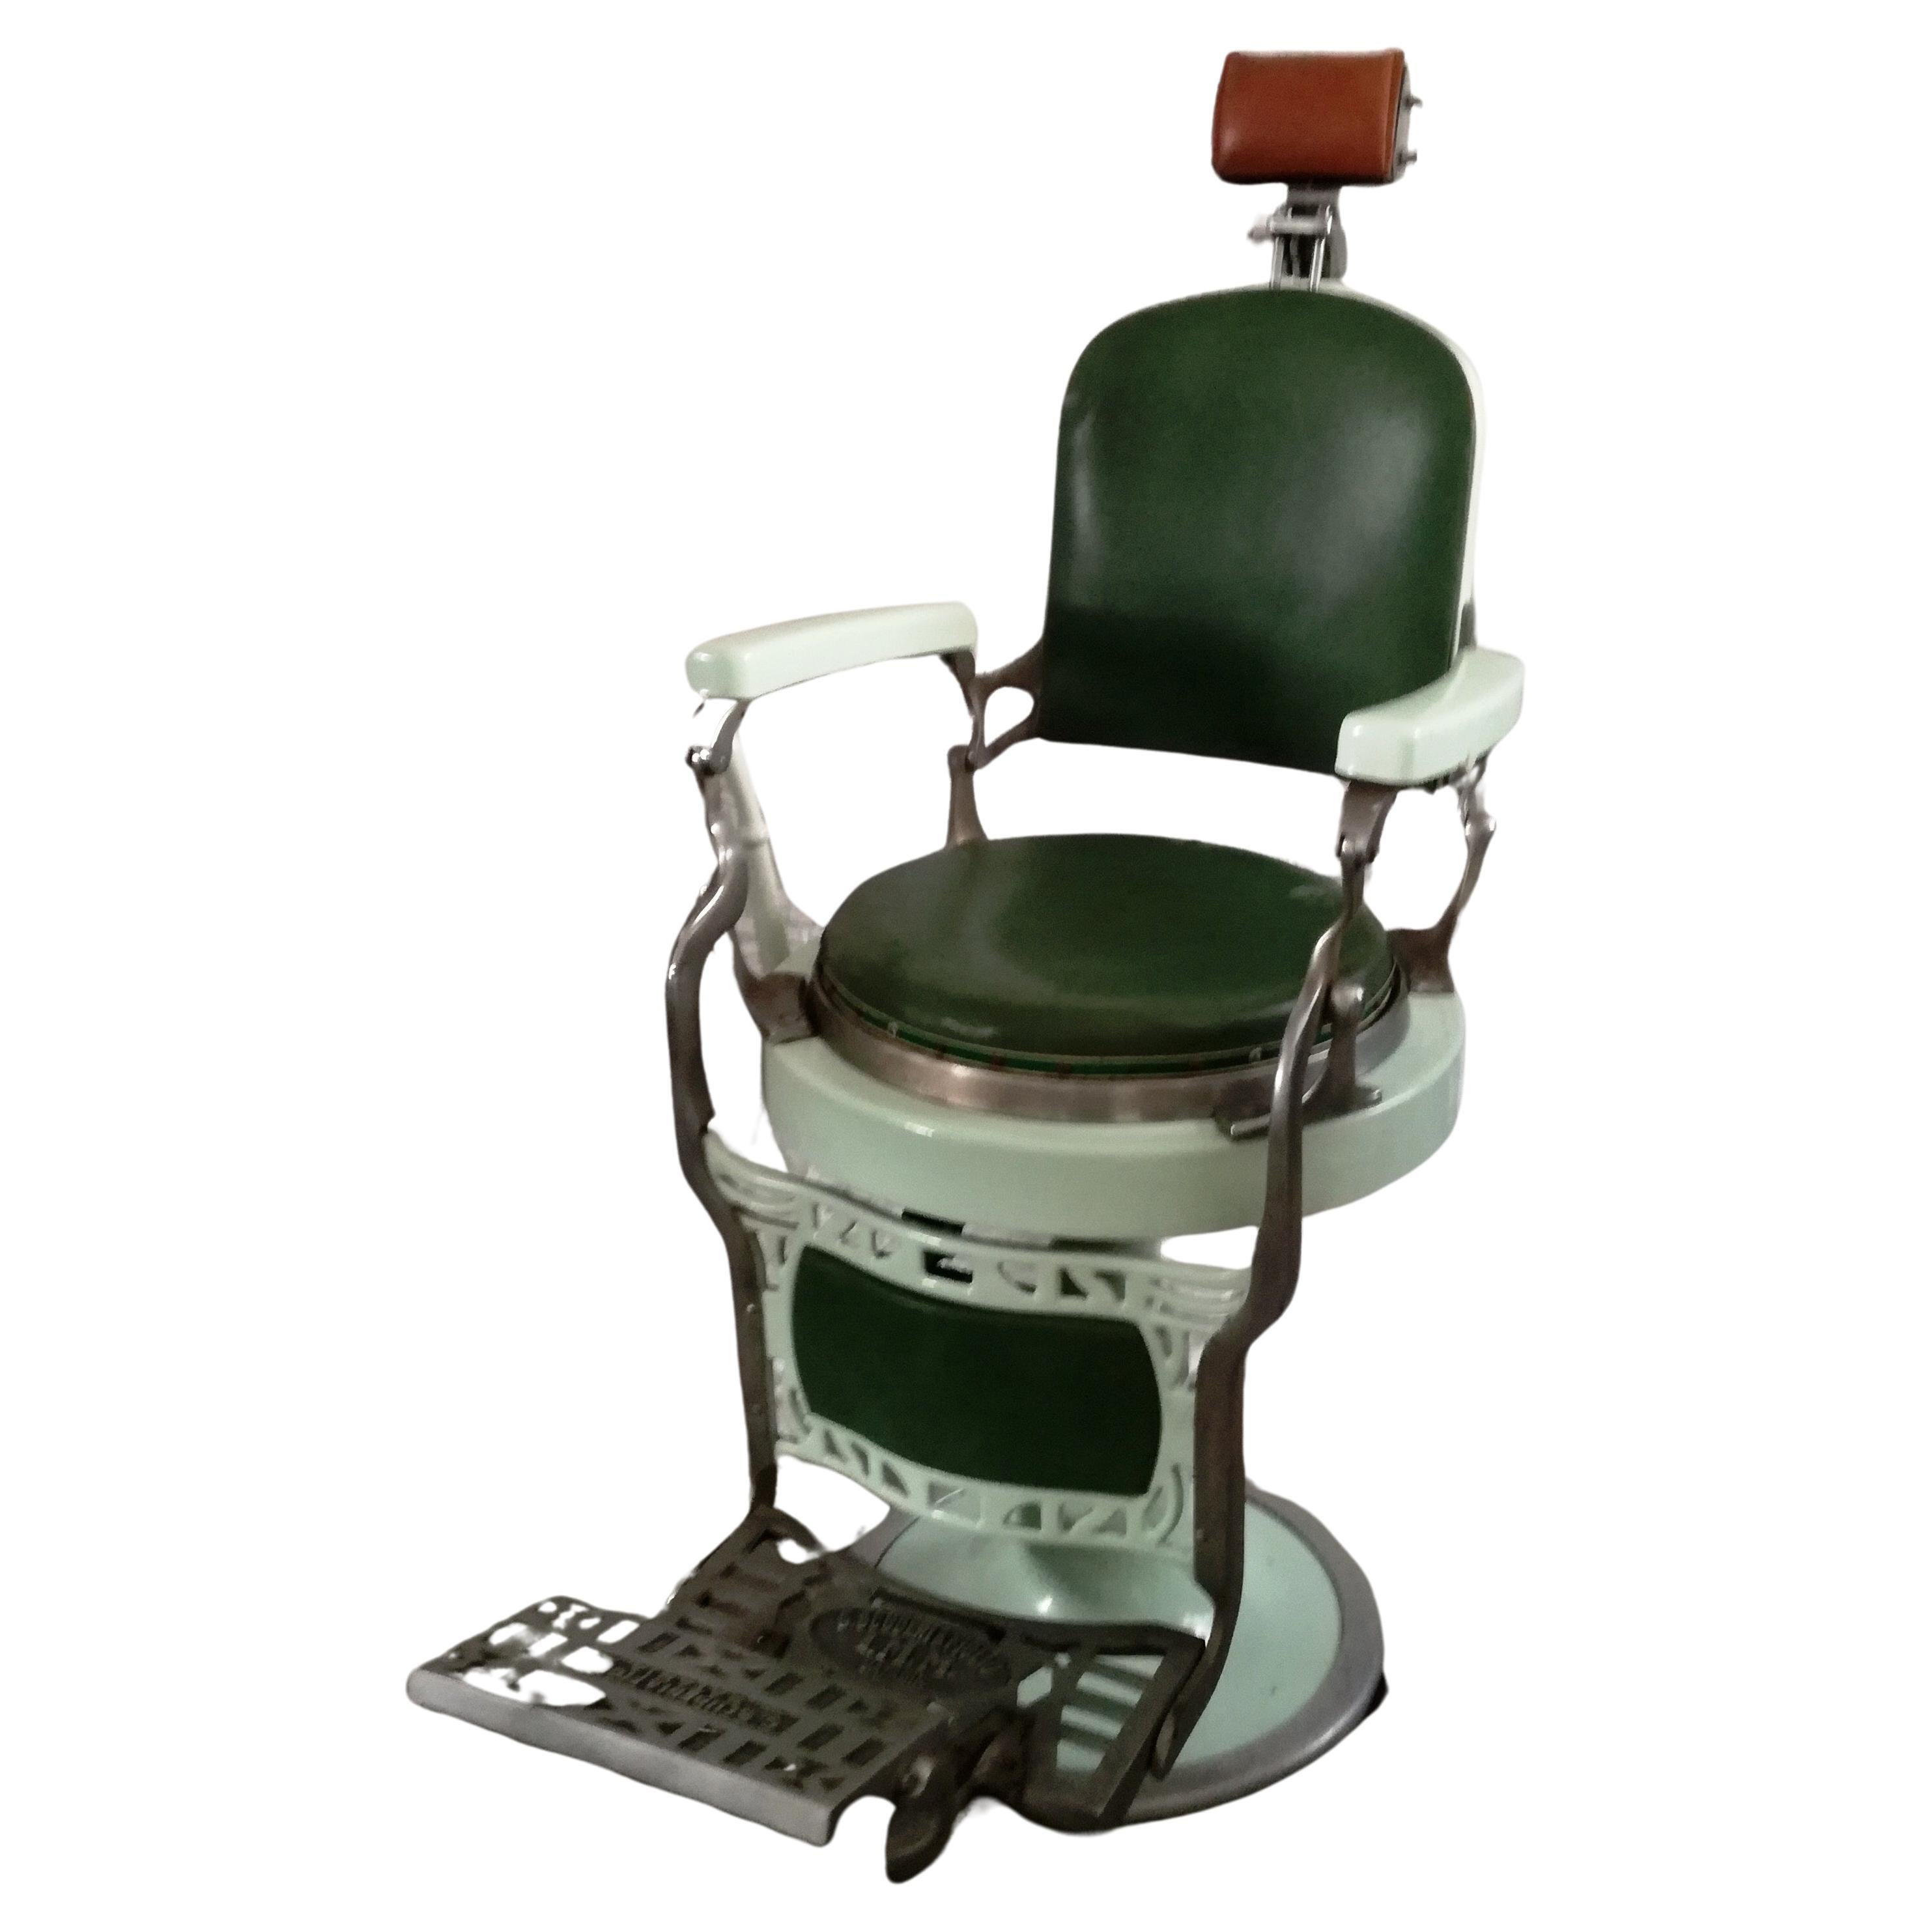 30s barber chair For Sale